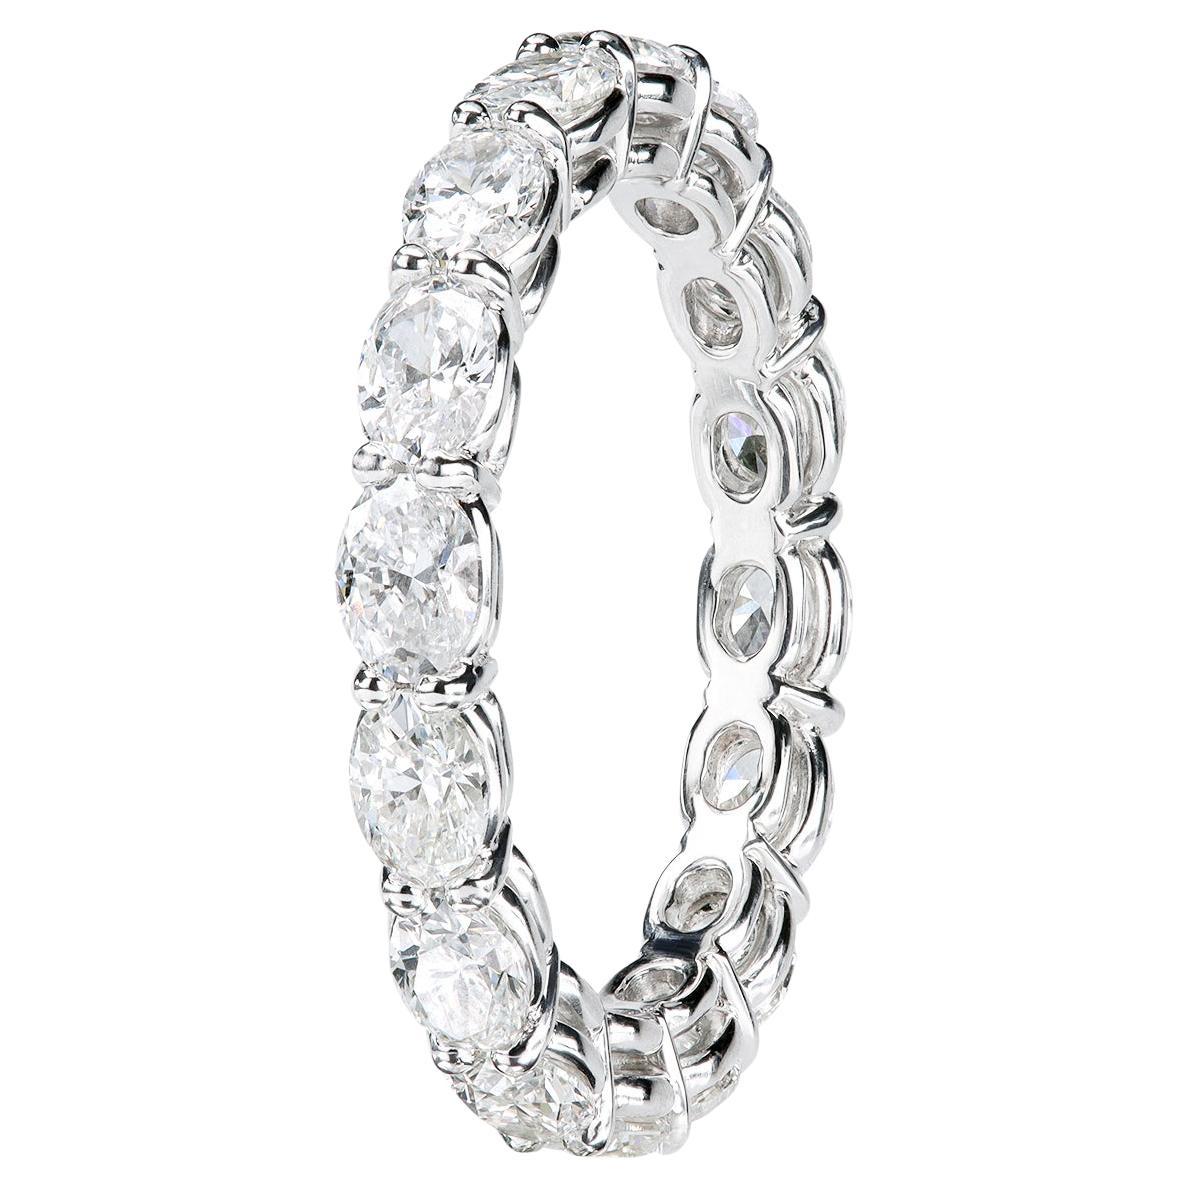 Leon Megé bespoke East-West oval diamonds eternity band 
16 natural oval F/VS diamonds
2.30 carats total weight
3.10 mm width
Shared-prongs
Rolex-grade platinum
Size: 6